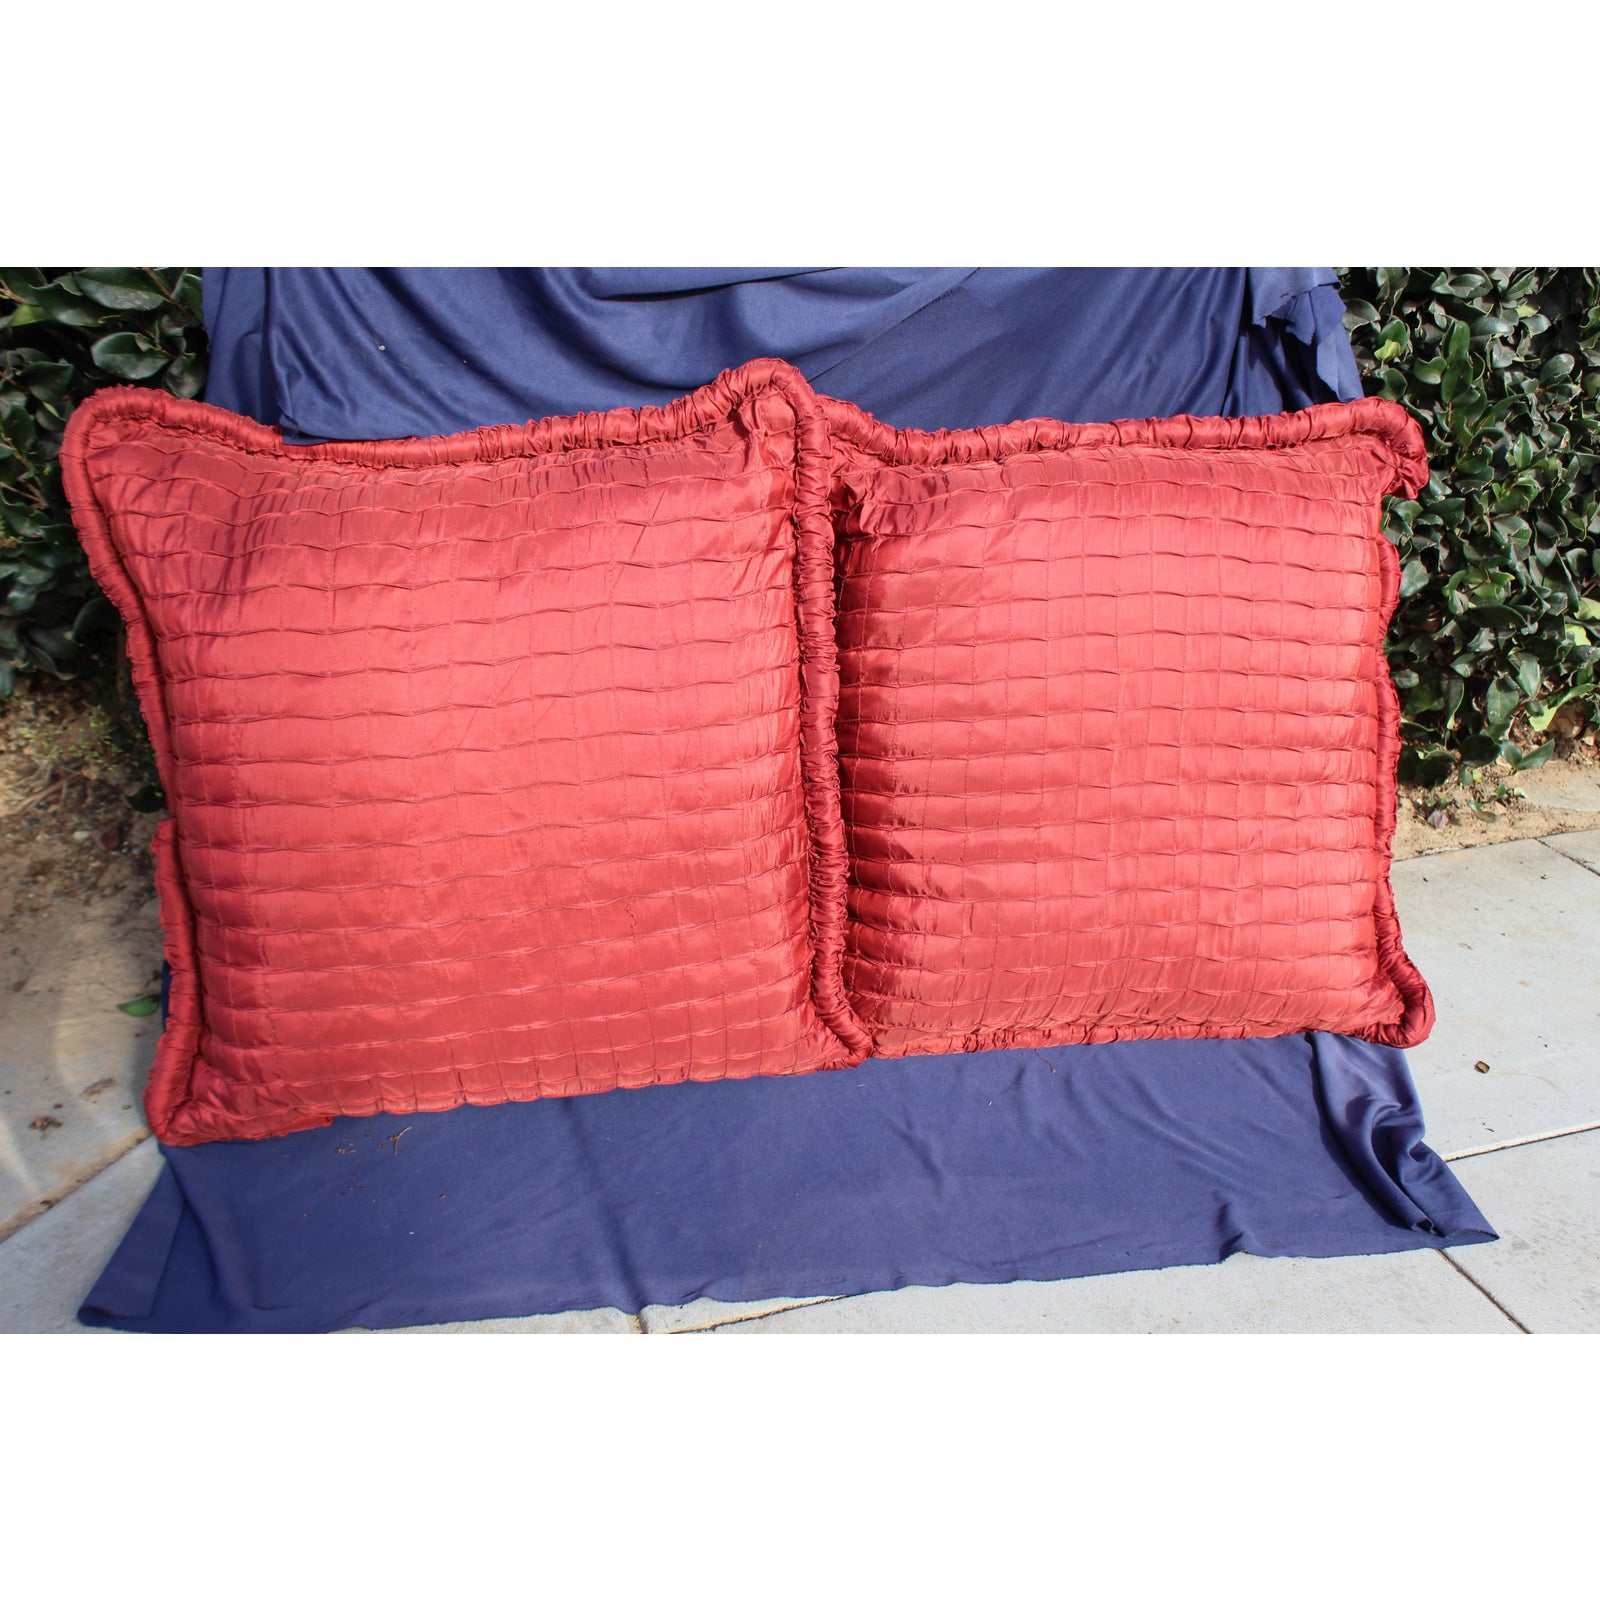 contemporary-red-down-filled-pillows-a-pair-0362